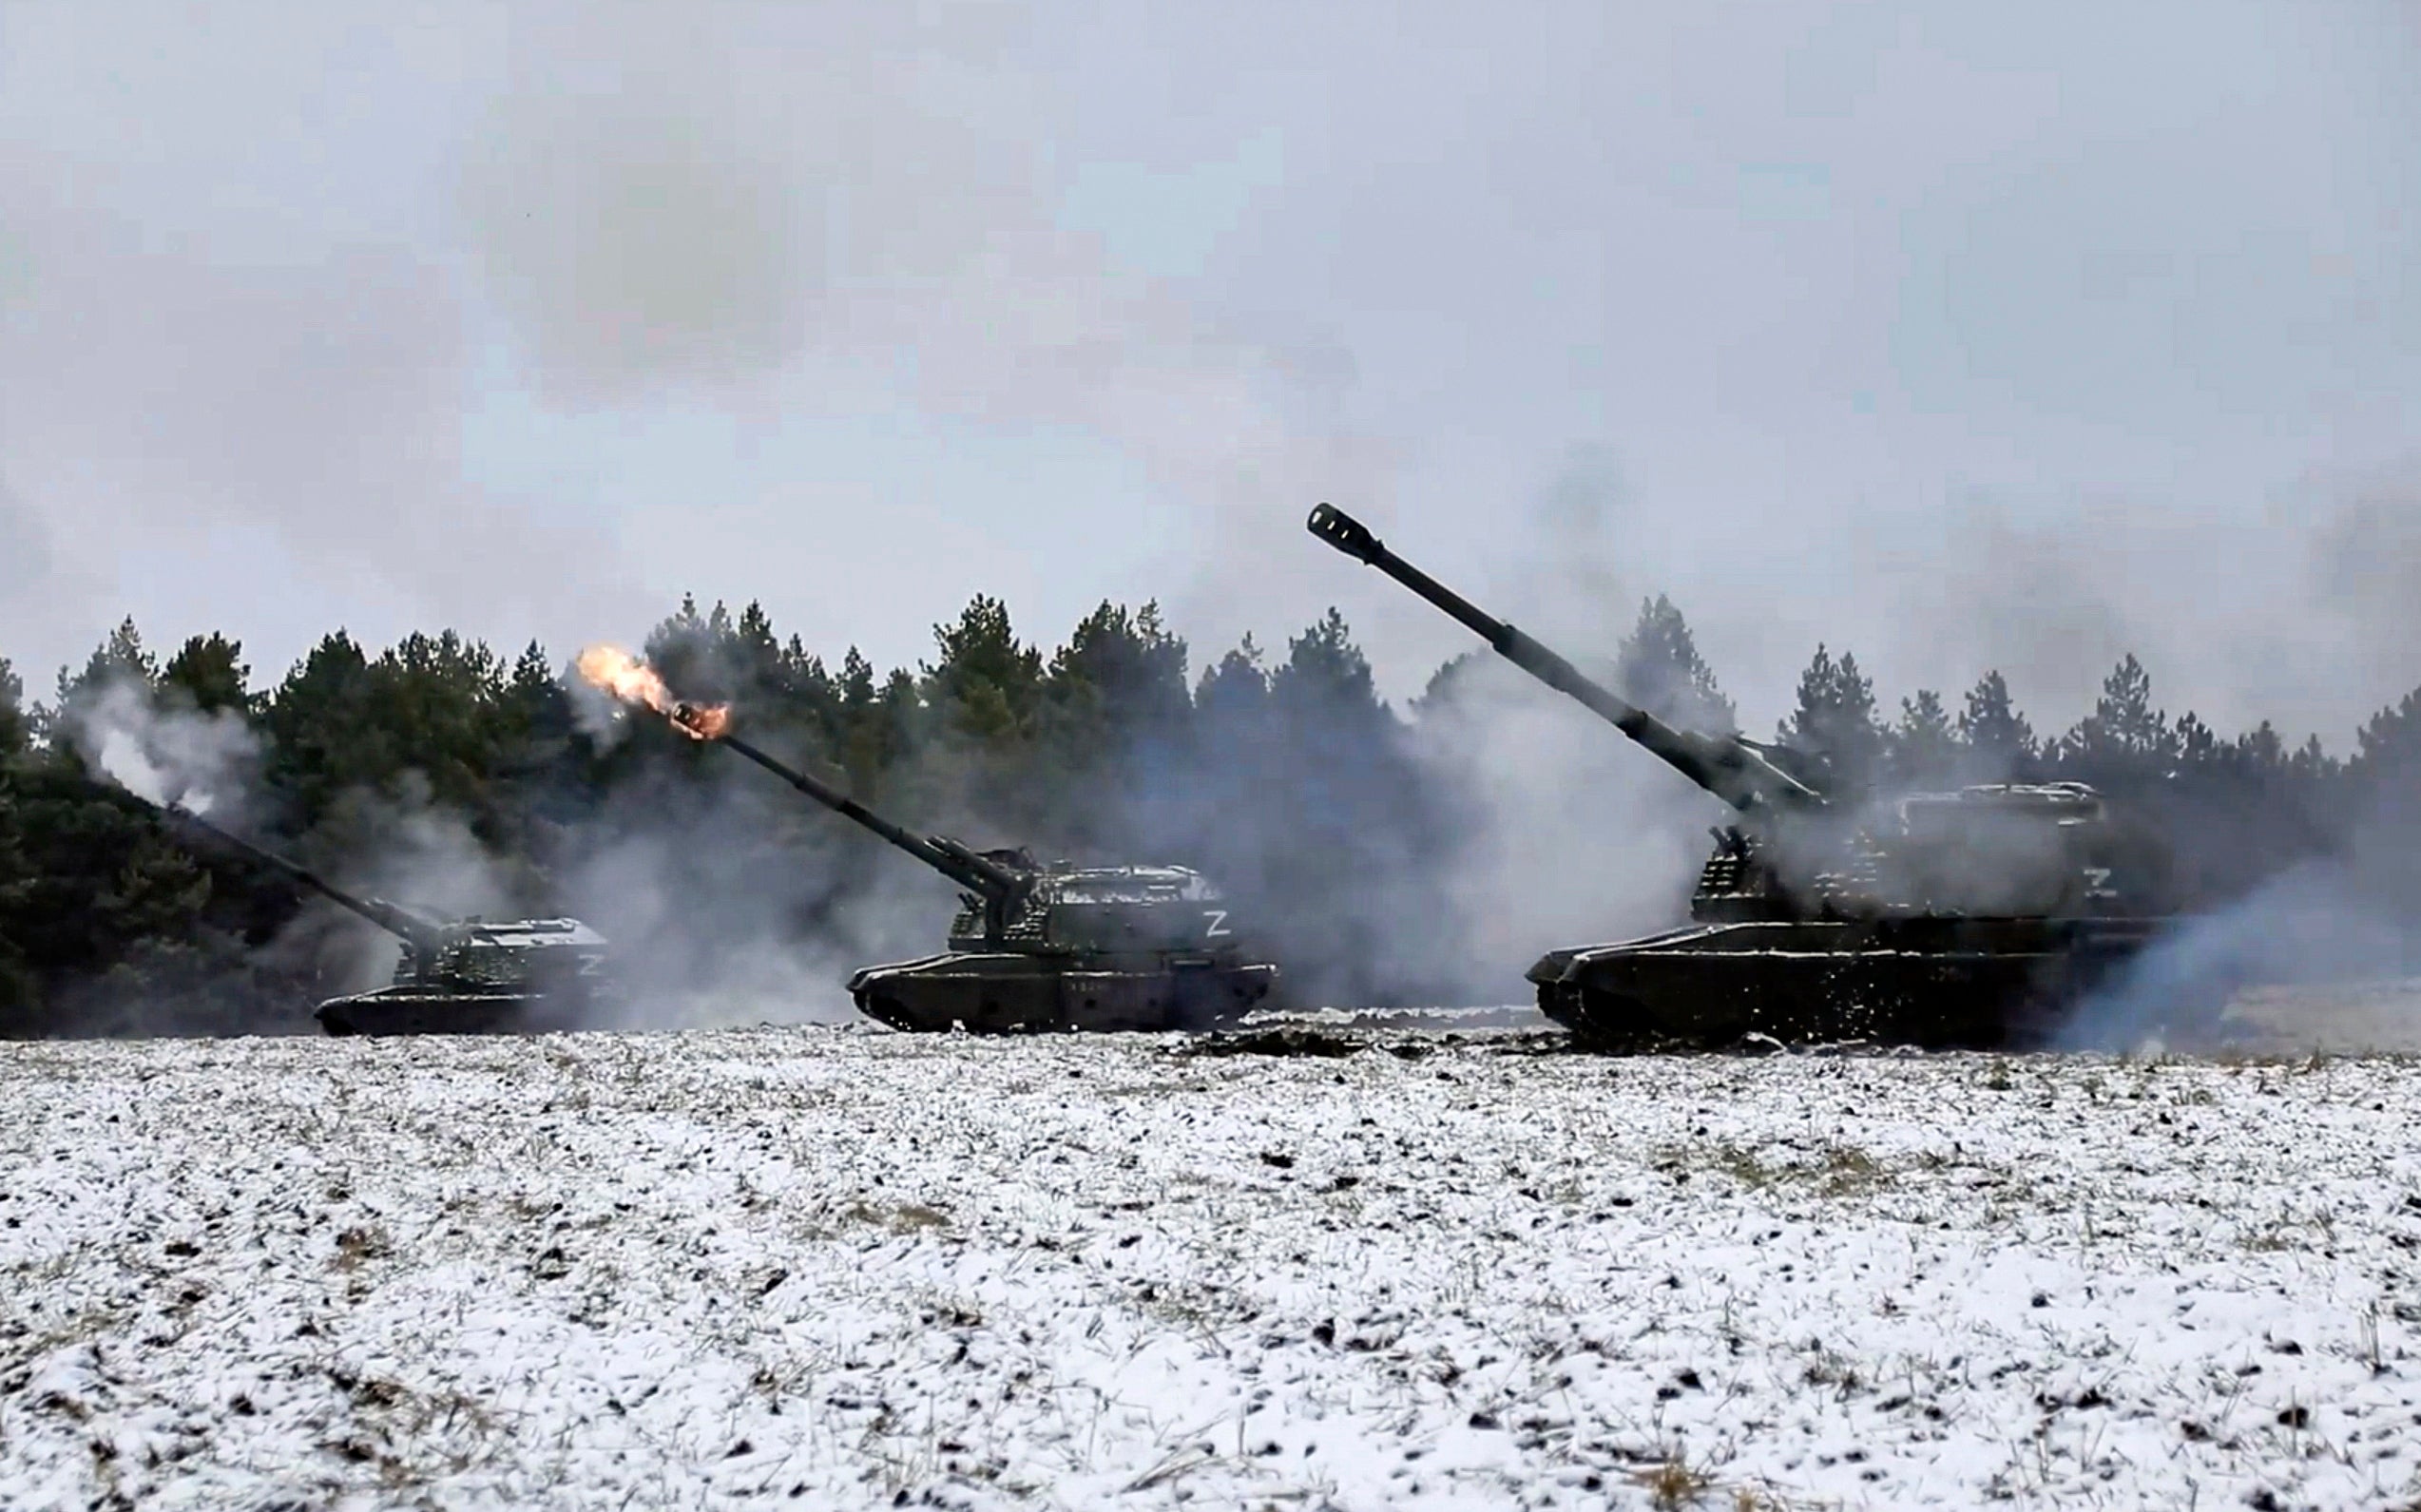 Russia is preparing around 2,000 tanks, 700 aircraft and around 500,000 men for a new assault on Ukraine